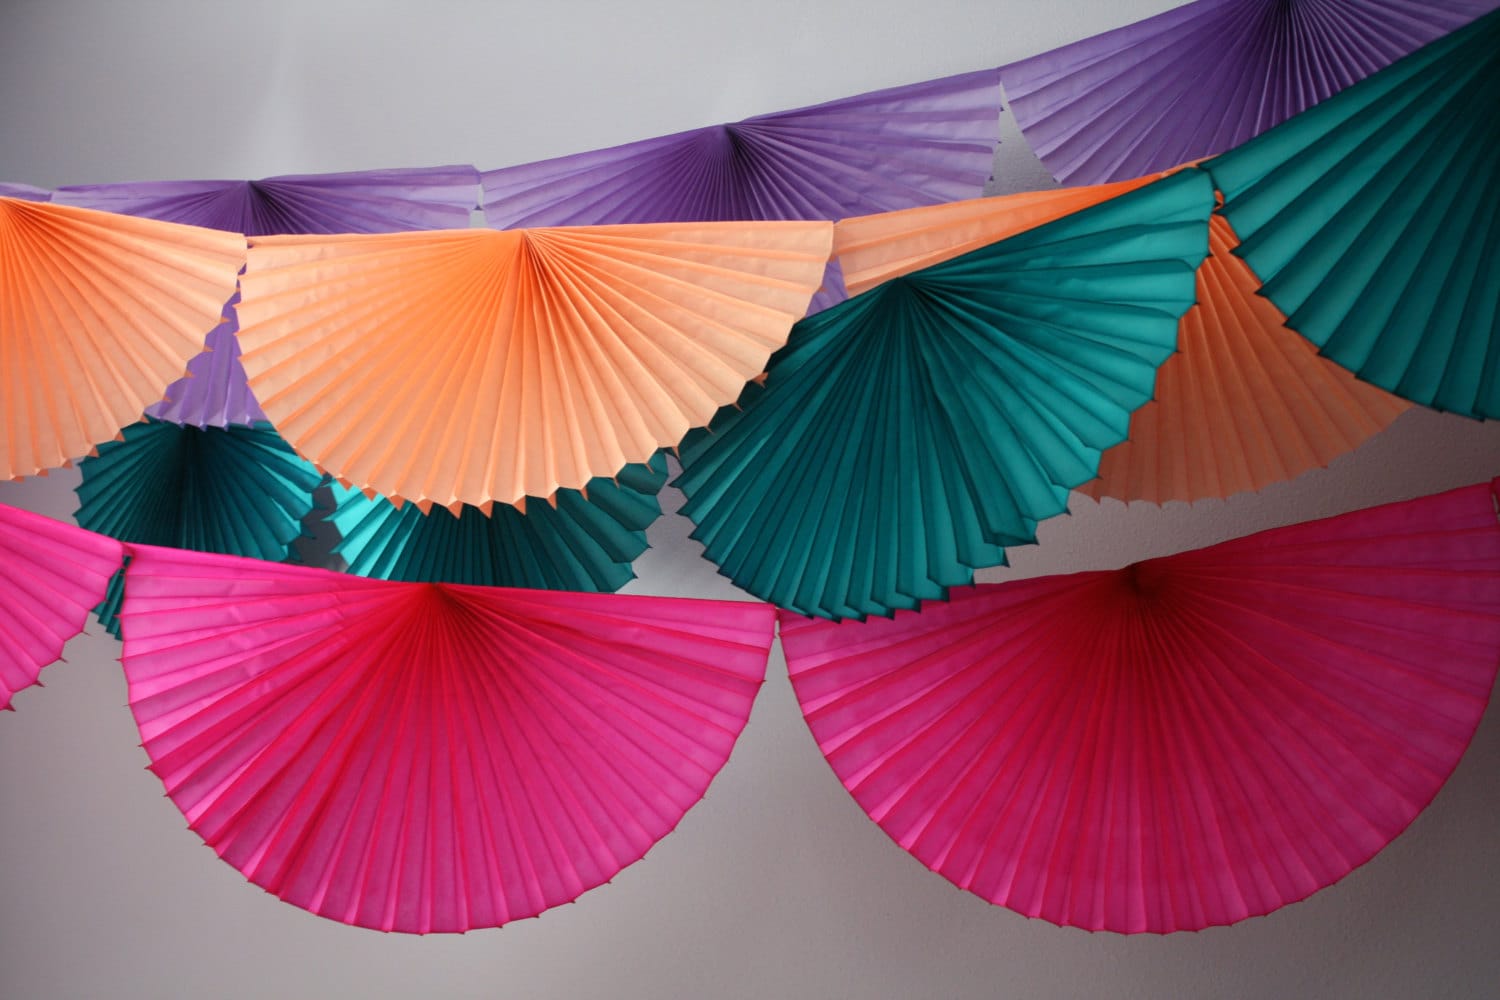 Meiduo Fiesta Party Supplies Mexican Party Decorations - Paper Fans Pom  Poms Flowers Tassel Garlands for Tropical Hawaiian Party Bachelorette  Birthday